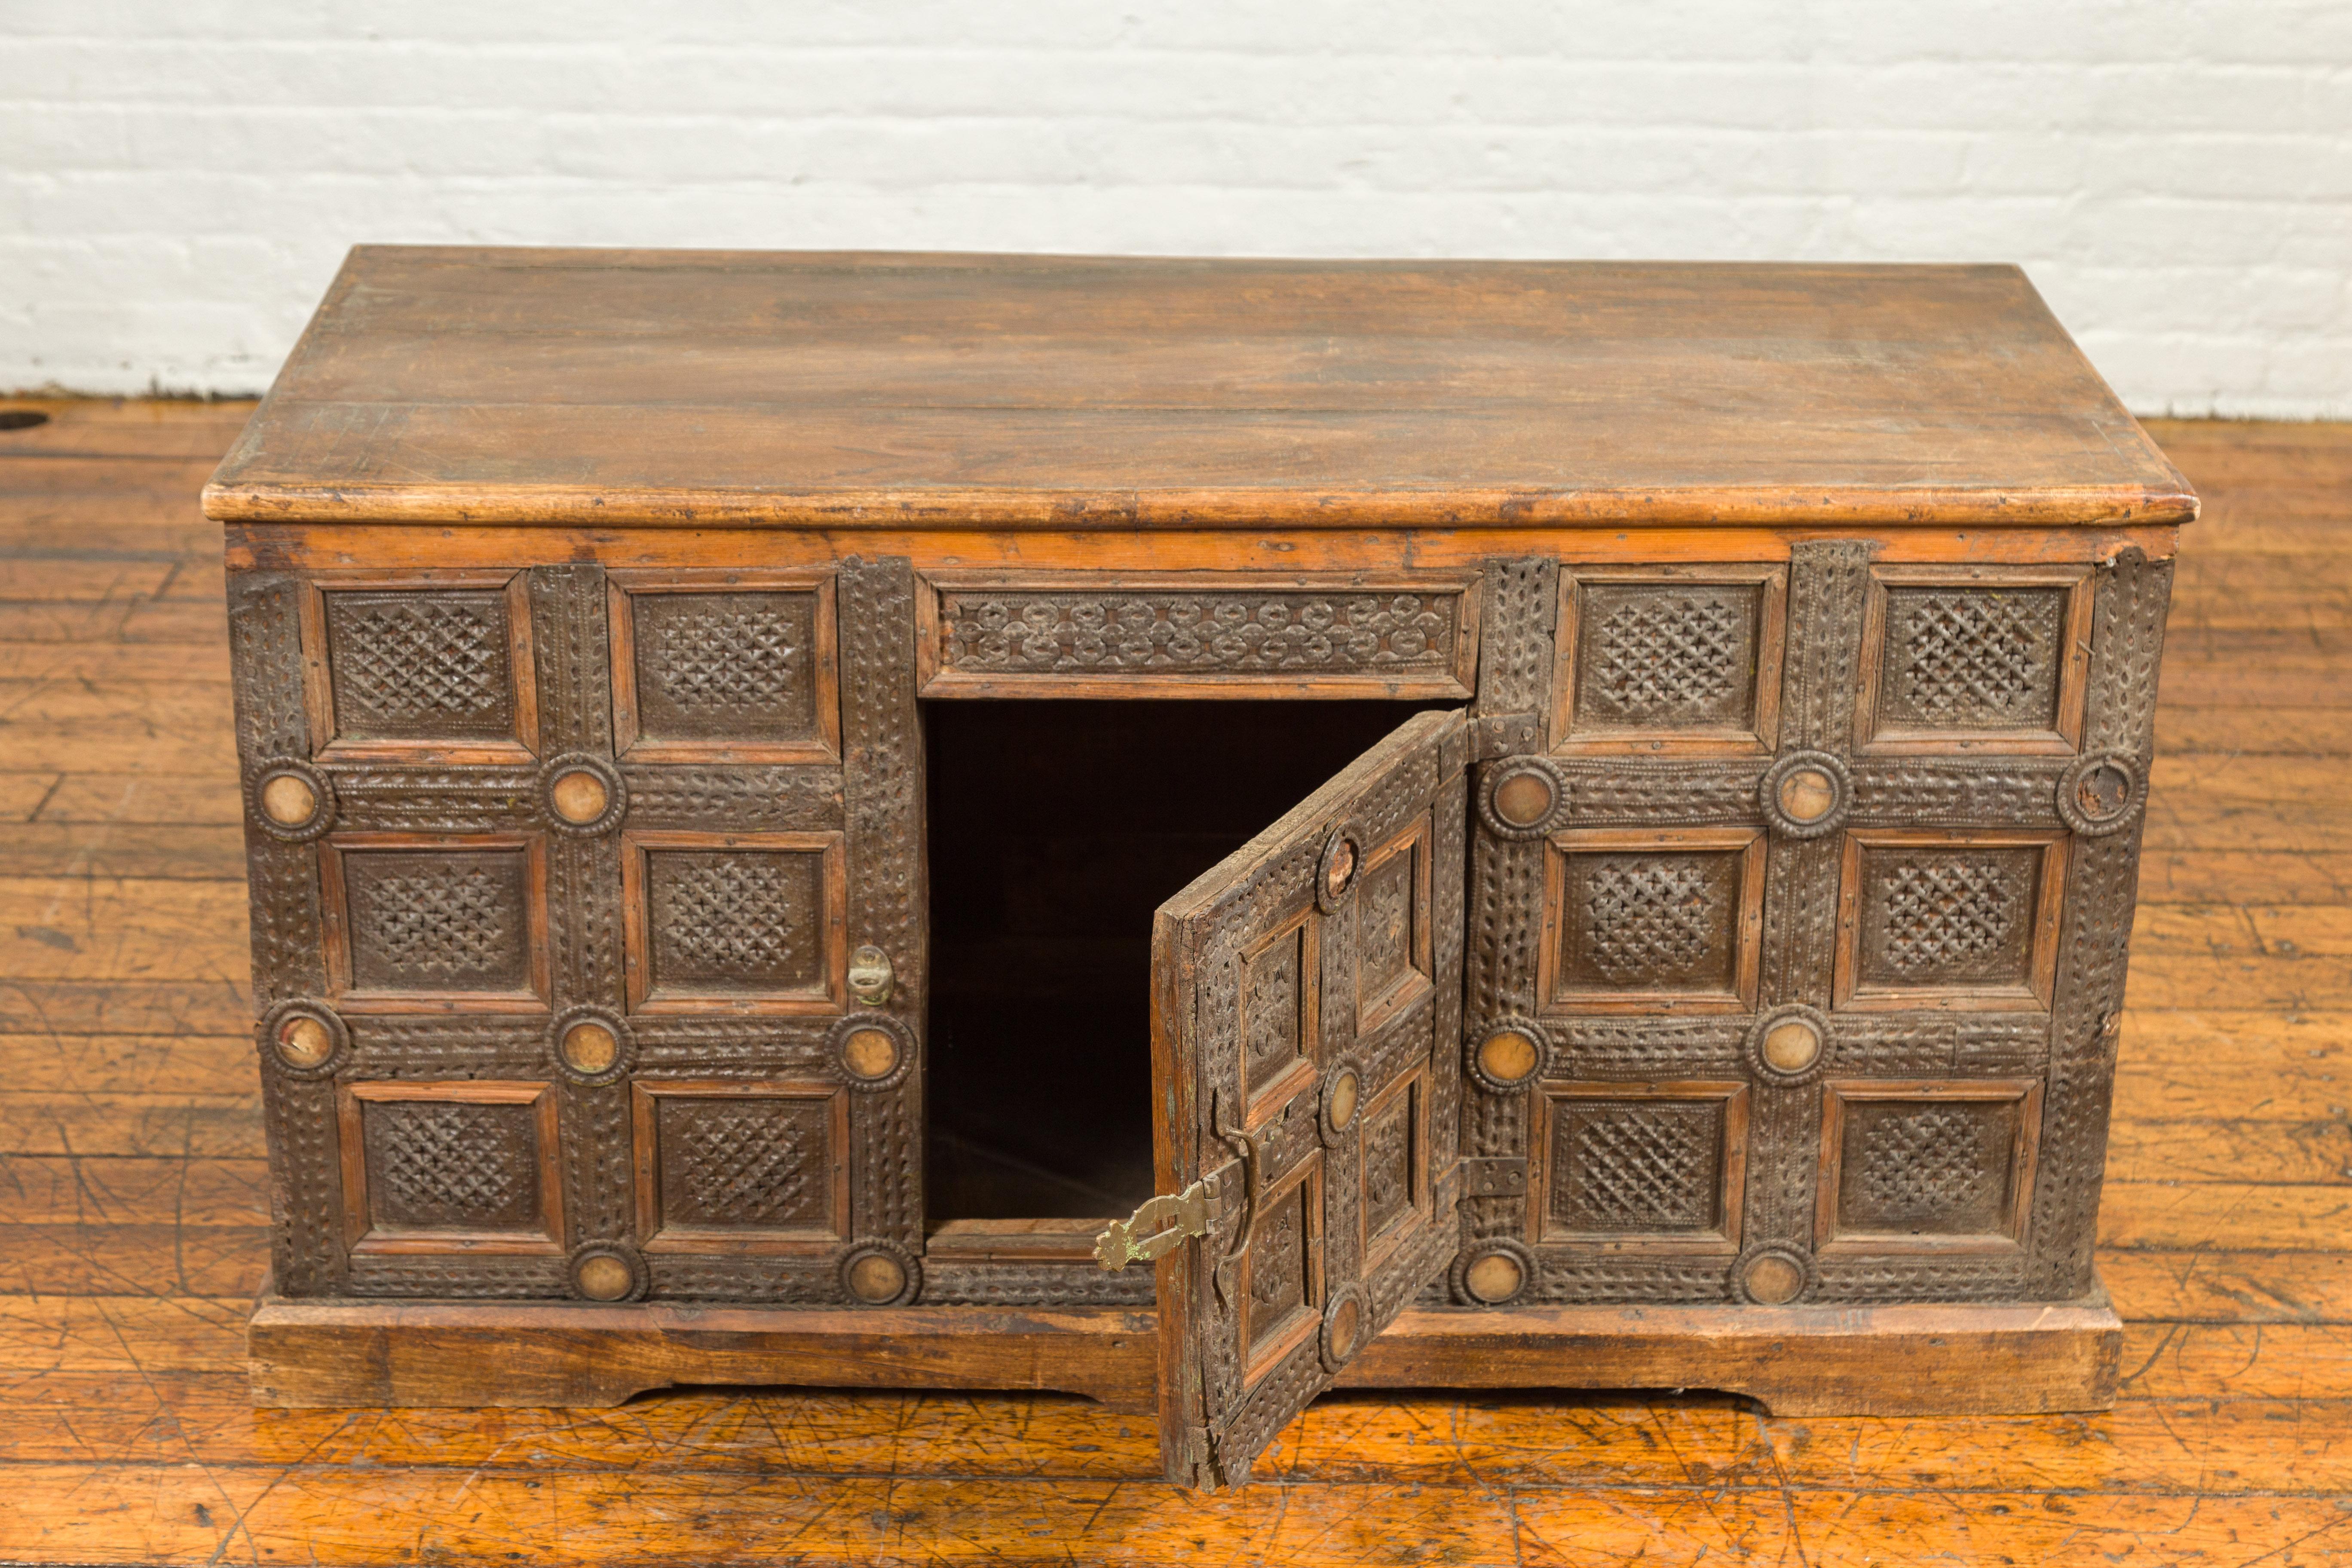 20th Century Indian Vintage Wood and Metal Cabinet with Geometric Decor